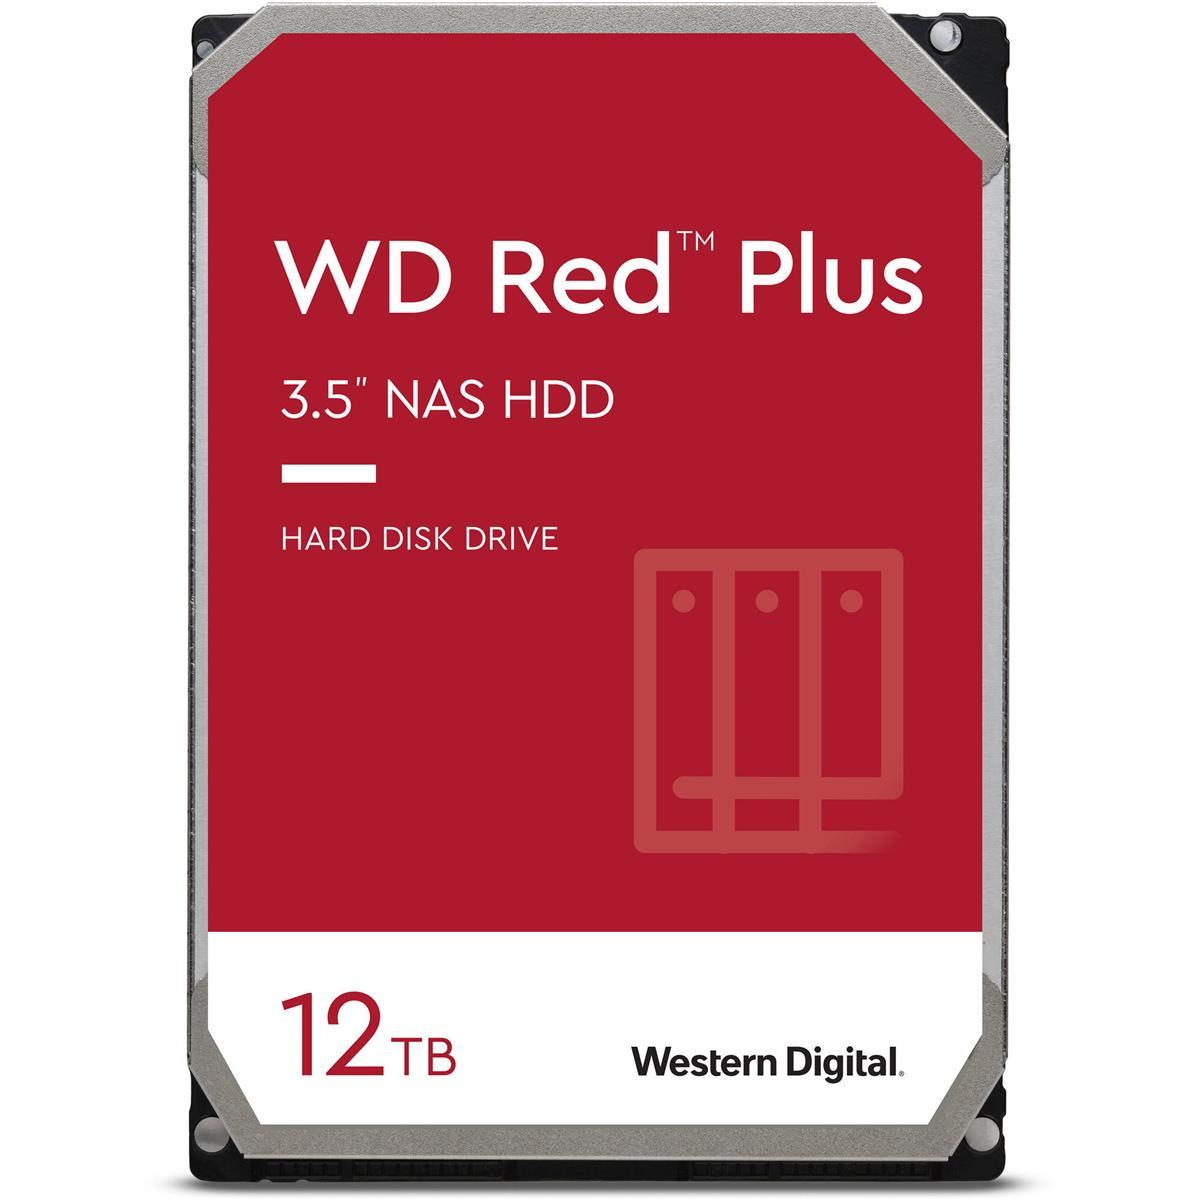 WD 6TB Red Plus 5640 RPM NAS Hard Drive for $99.99 Shipped